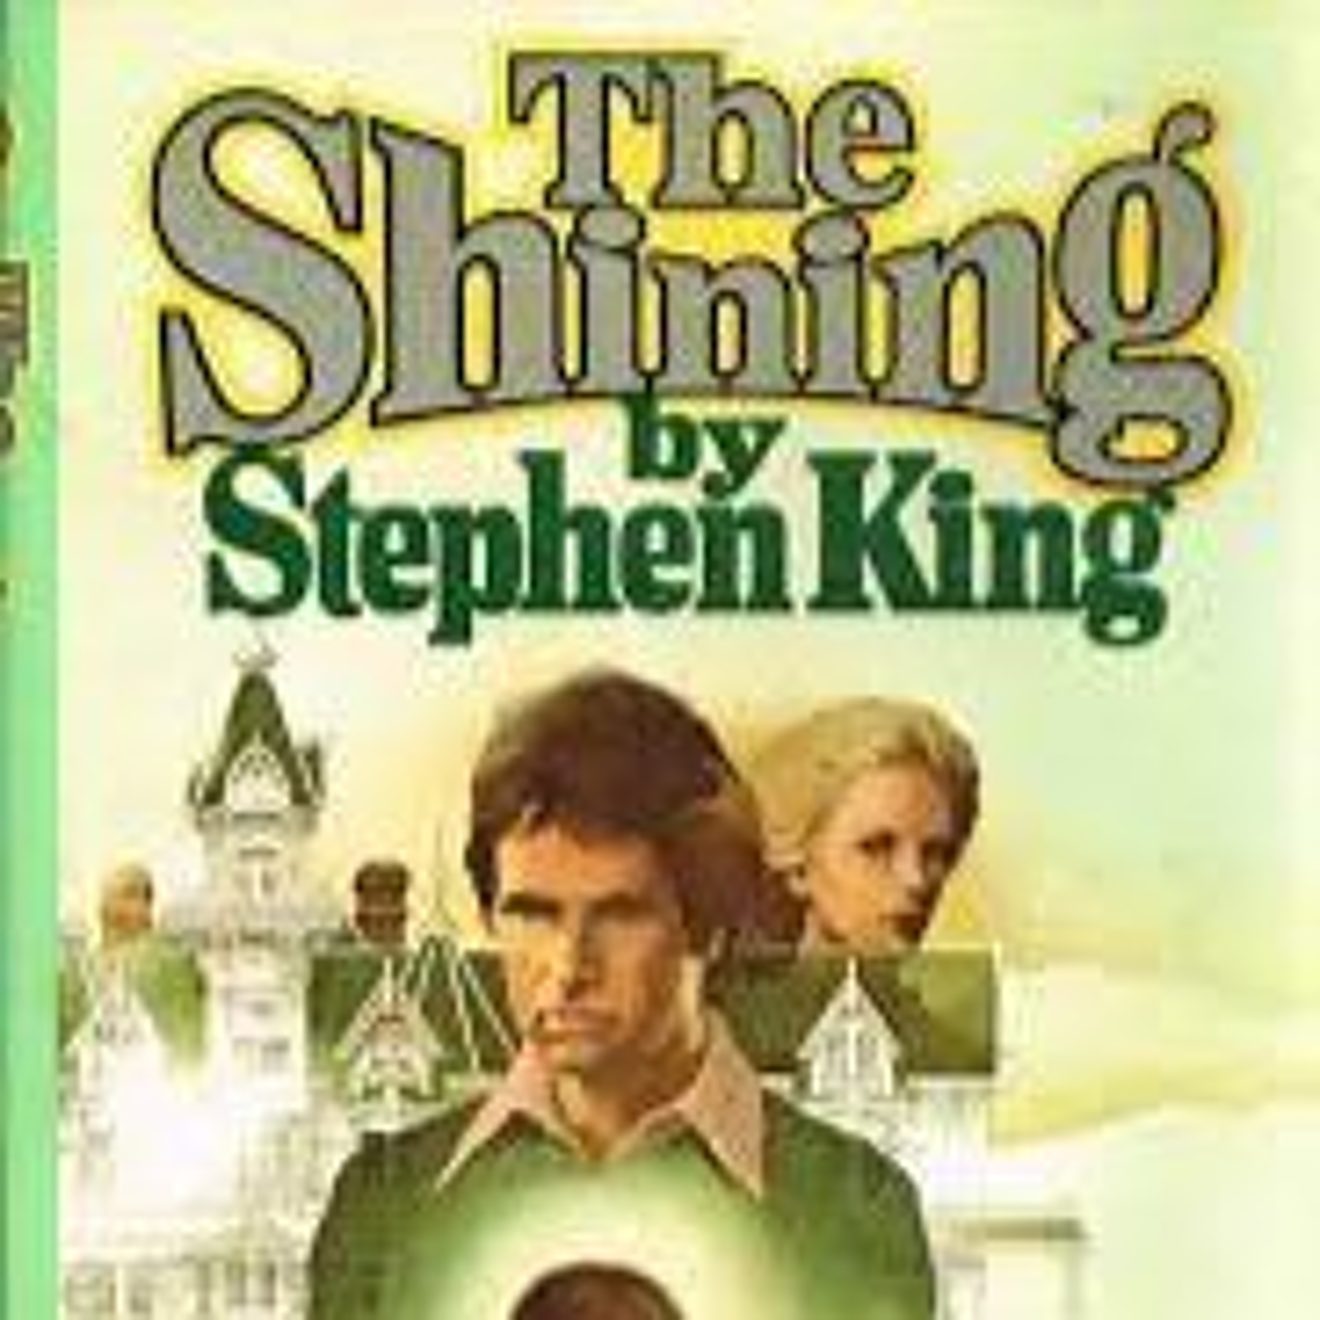 Episode 113 – The Shining Pt.2 – “Shines for Dick”